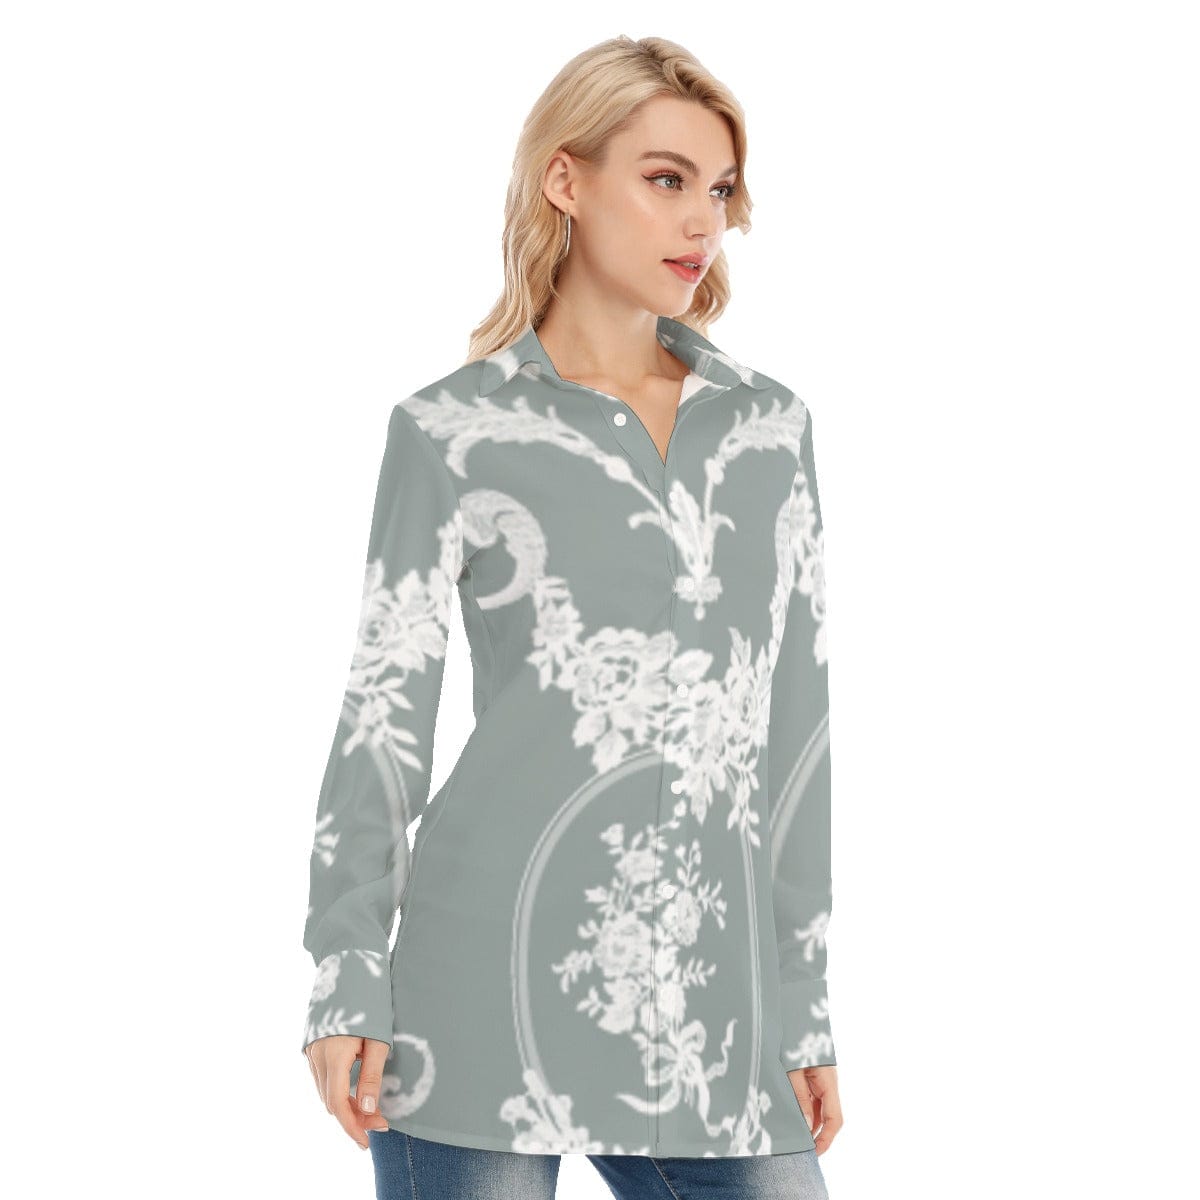 3R9FL All-Over Print Women's Long Shirt |115GSM 98% Cotton and 2% spandex